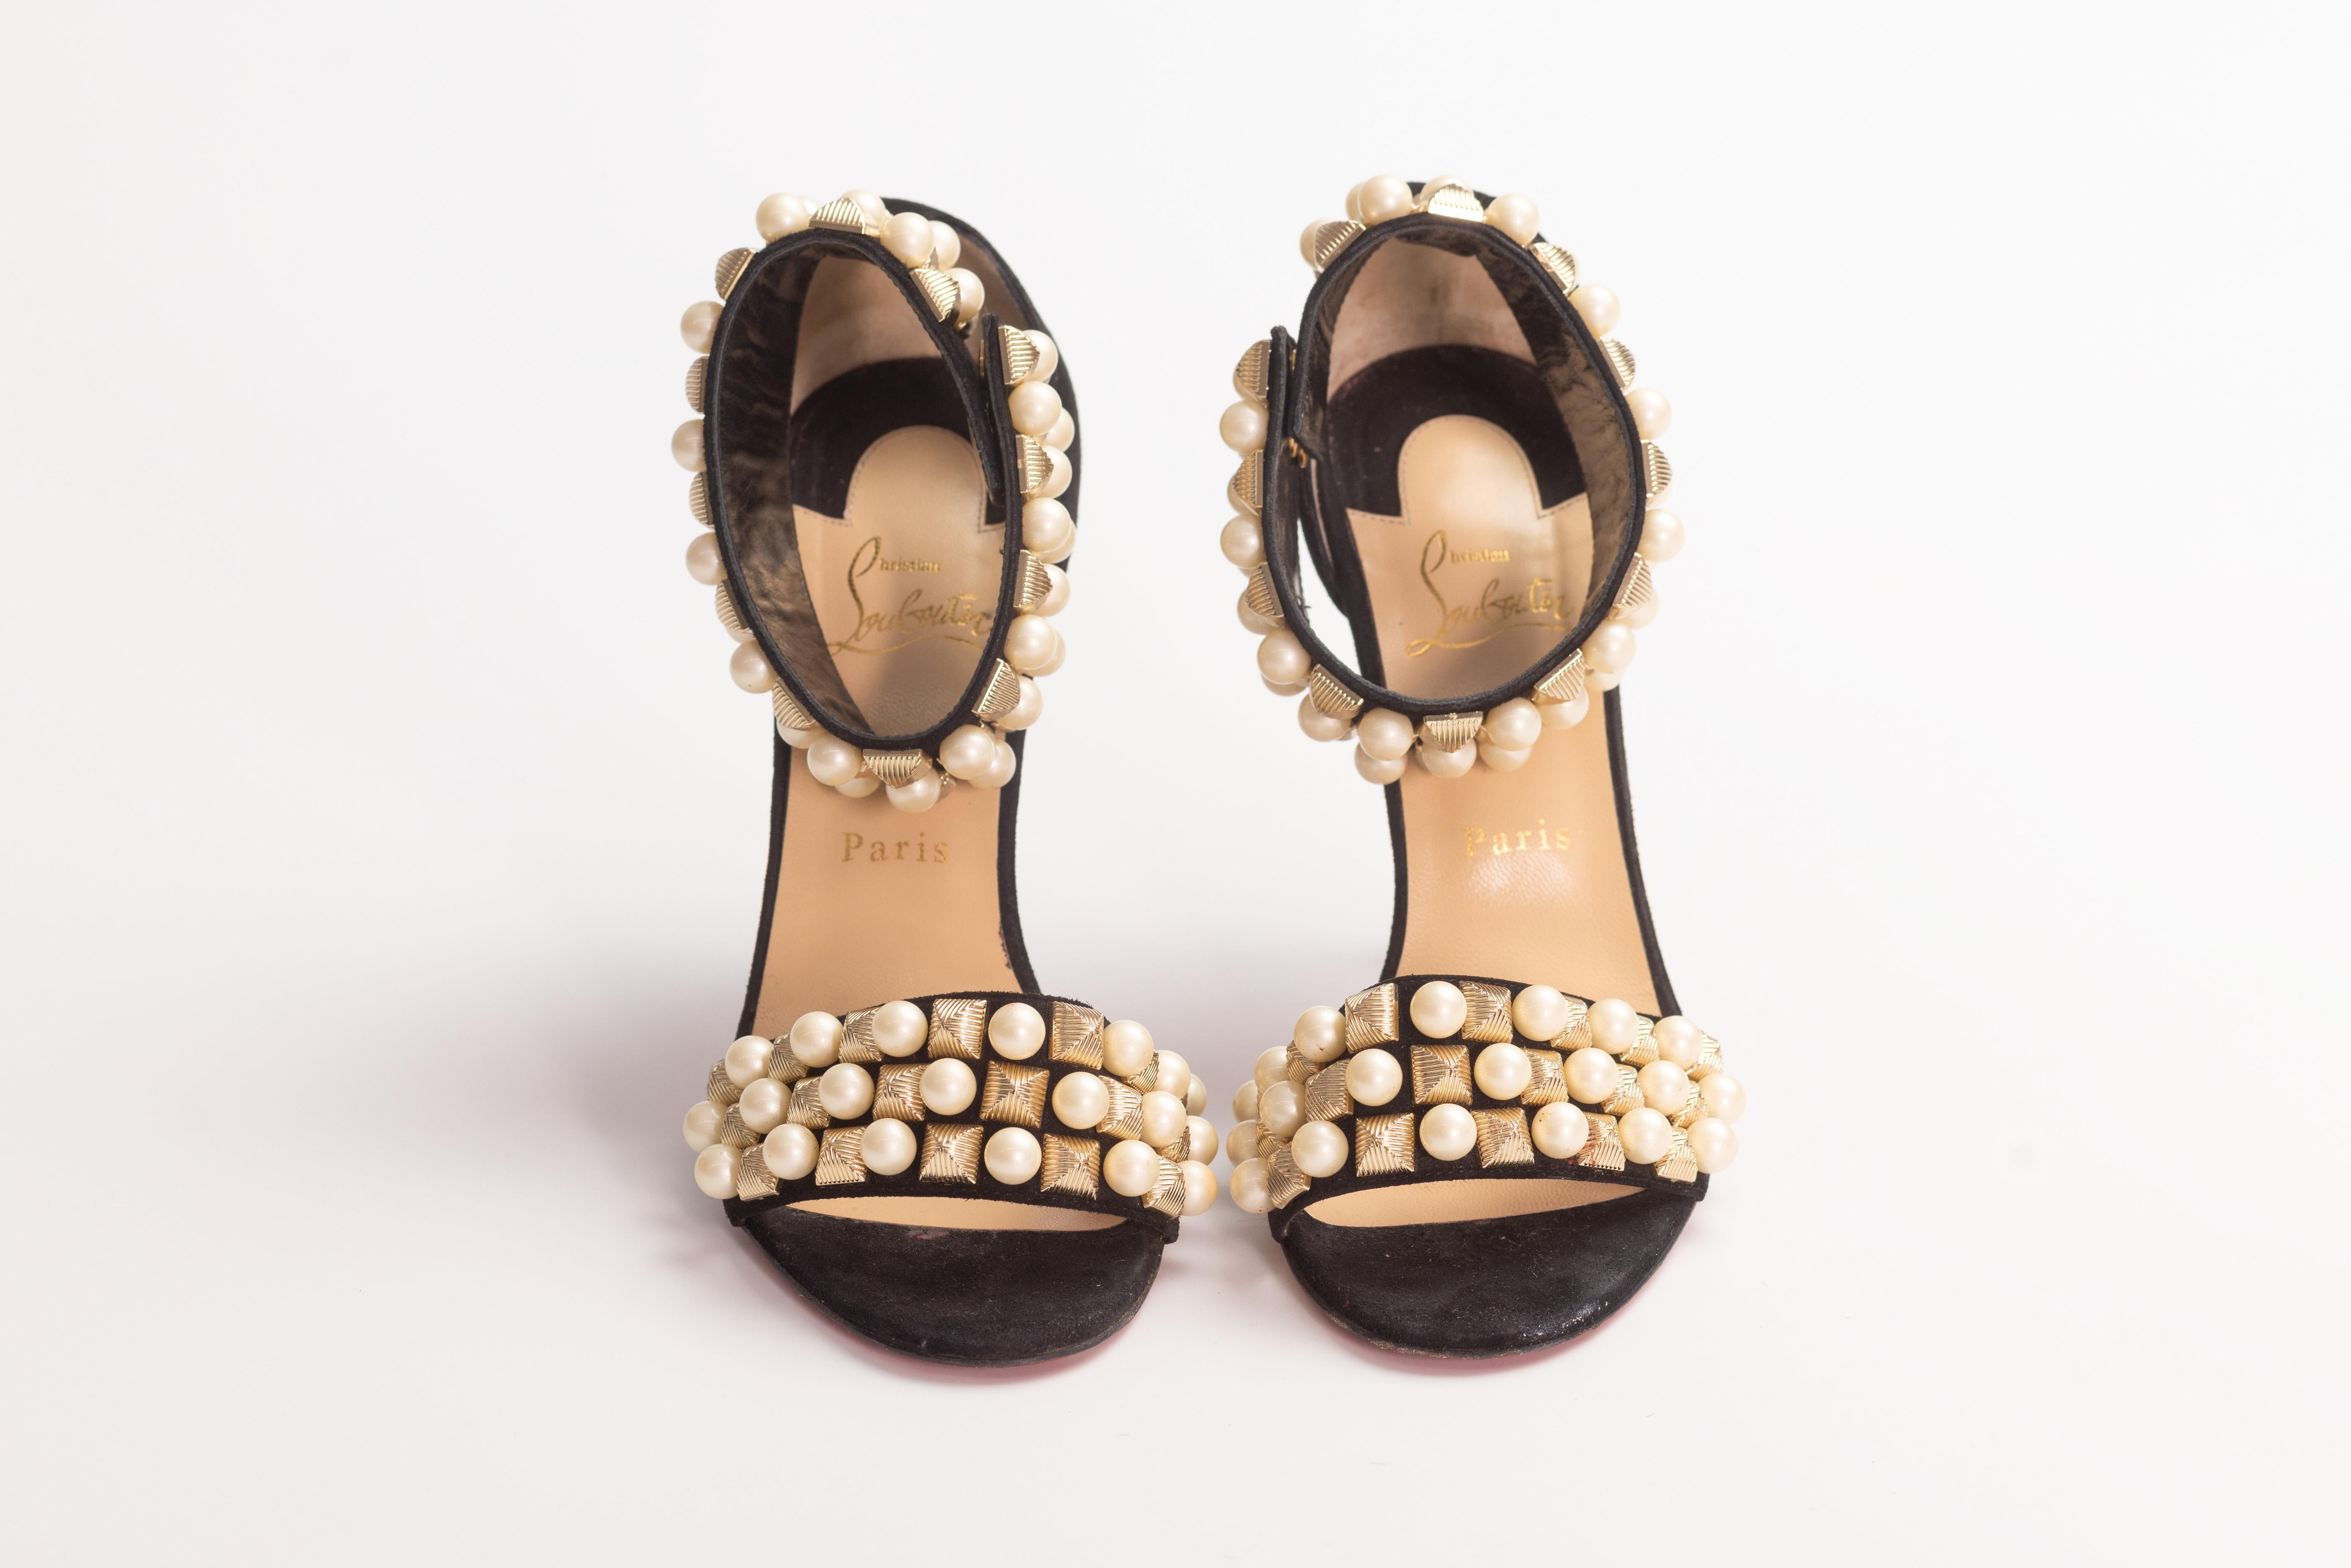 CHRISTIAN LOUBOUTIN STUDS PEARLS BLACK VELVET TUDOR HEELS (EU 39)

These Christian Louboutin sandals are made from black suede. They feature almond open toes, straps at the vamps, ankle straps with snap button closure, gold tone studs and round